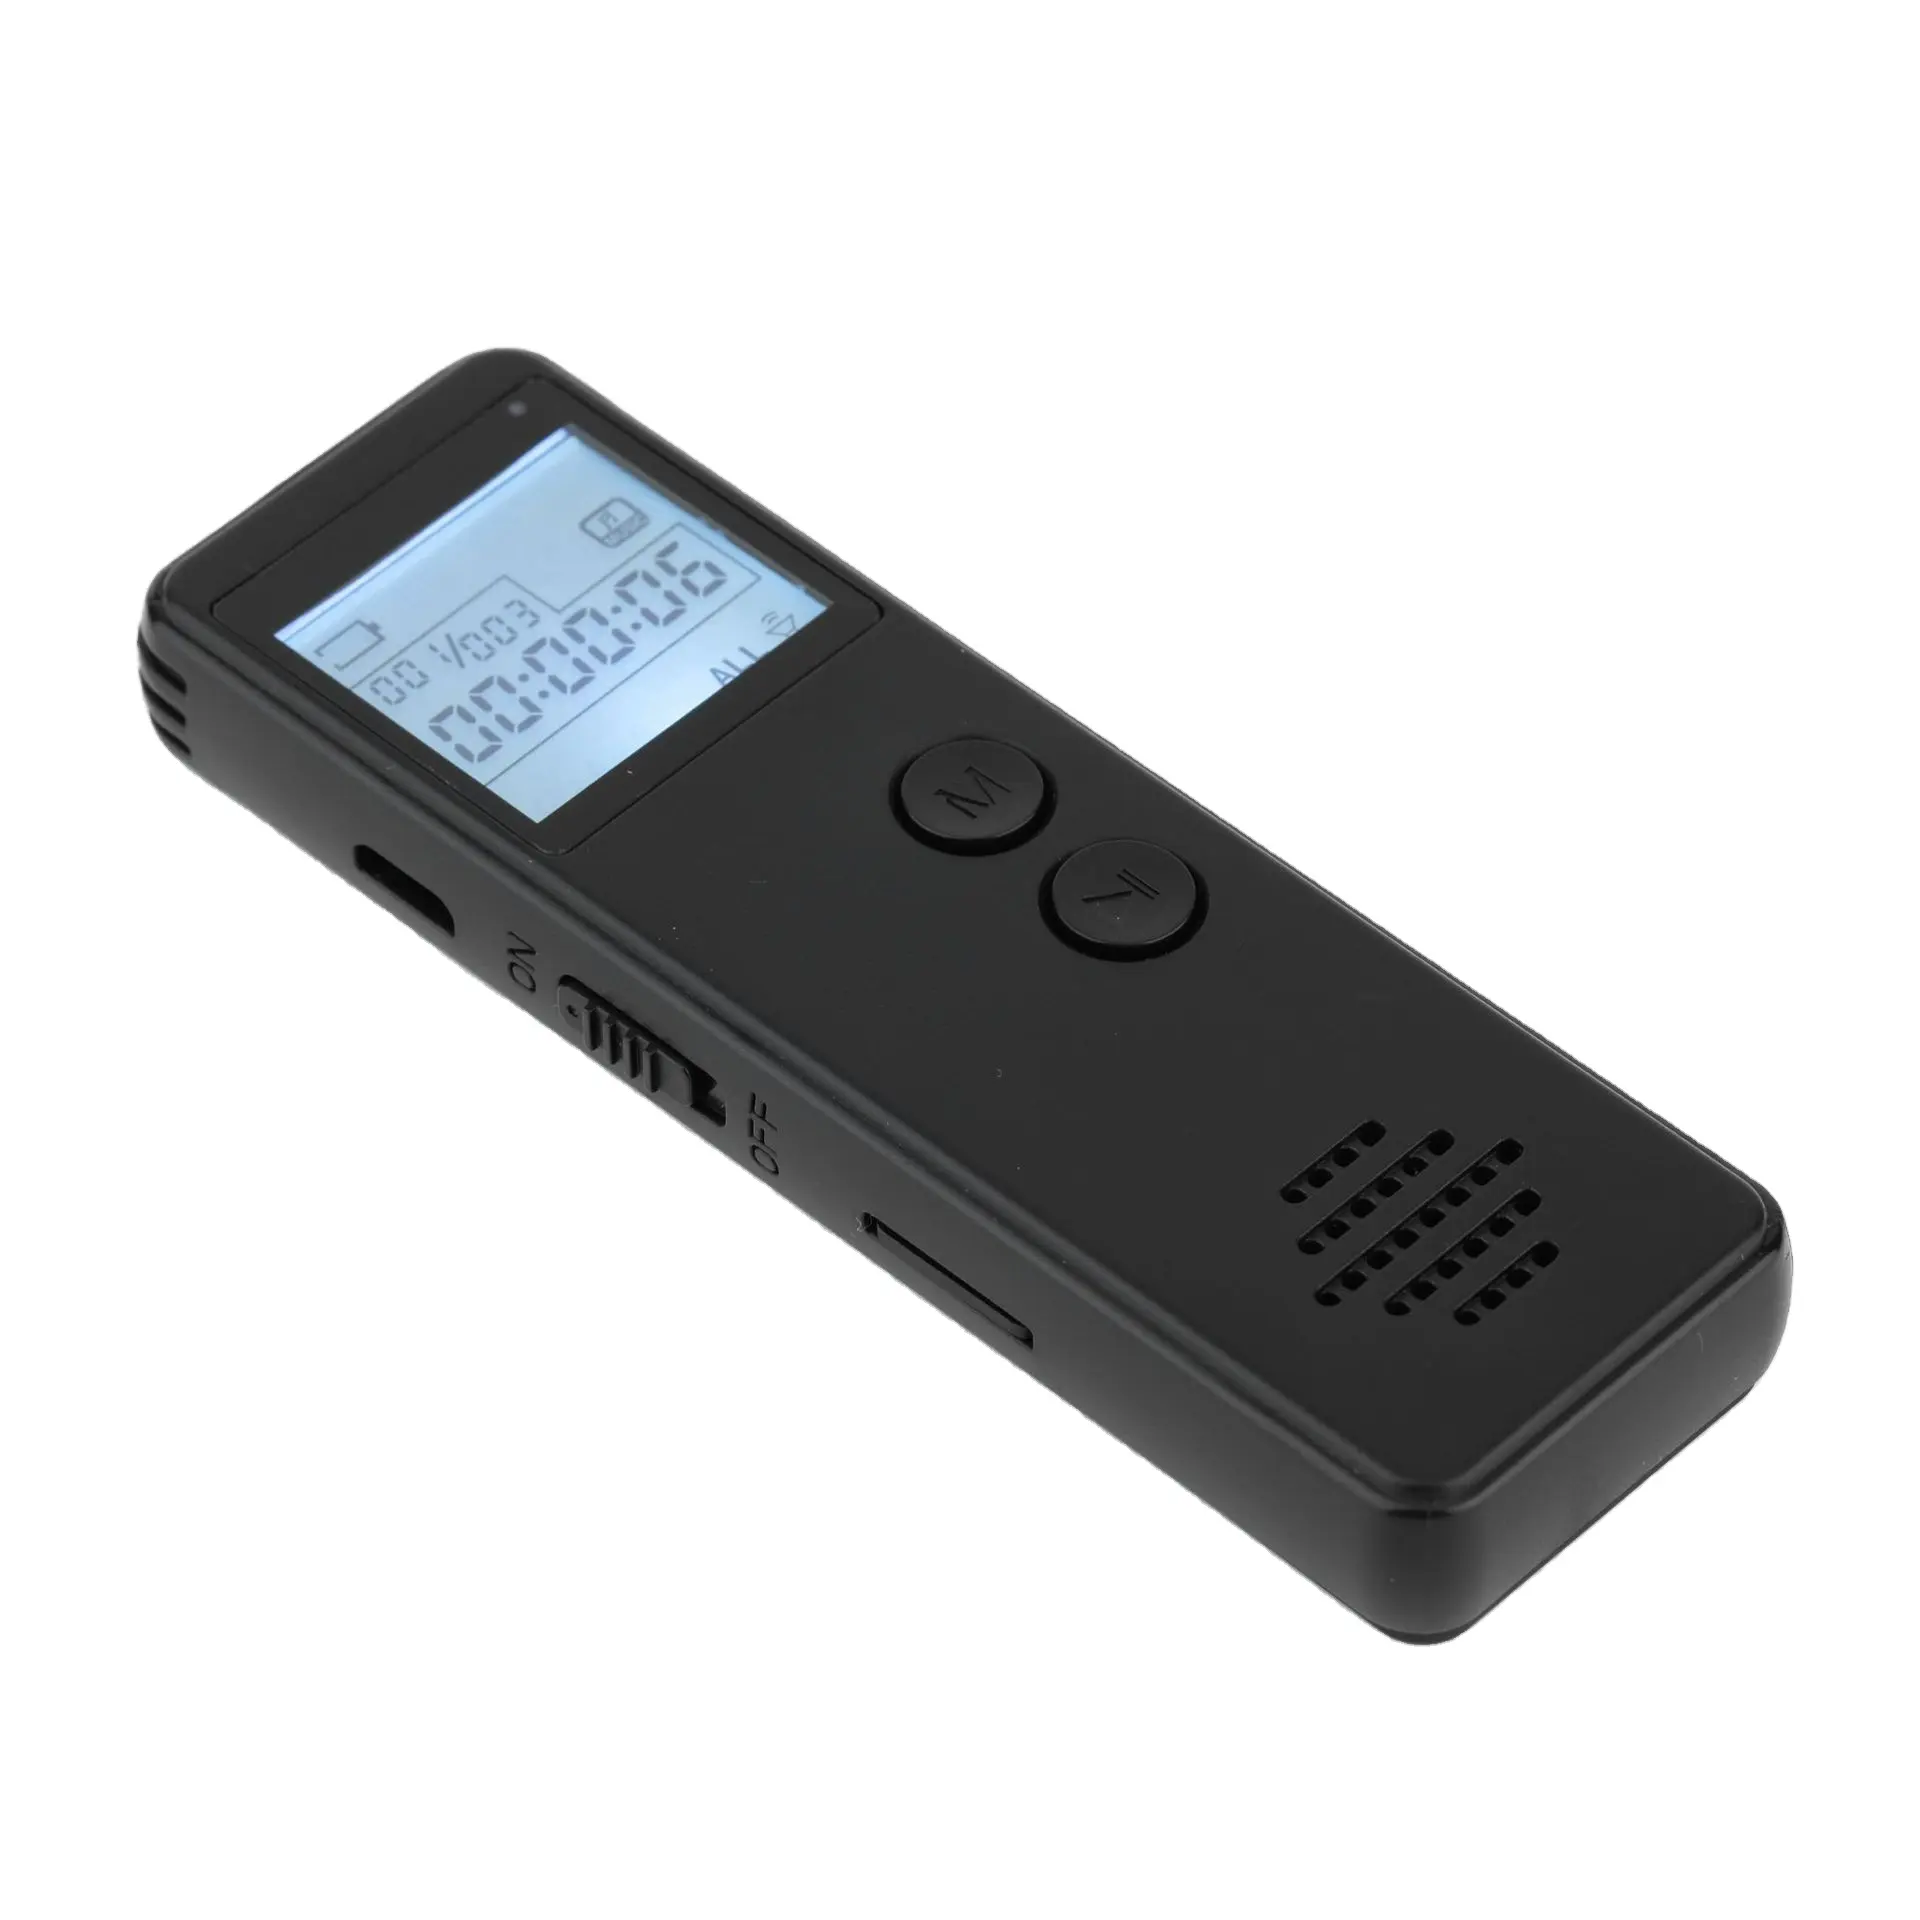 Long Distance Audio MP3 Dictaphone Noise Reduction Voice One Key Recording MP3 WAV Record Player 128Kbps